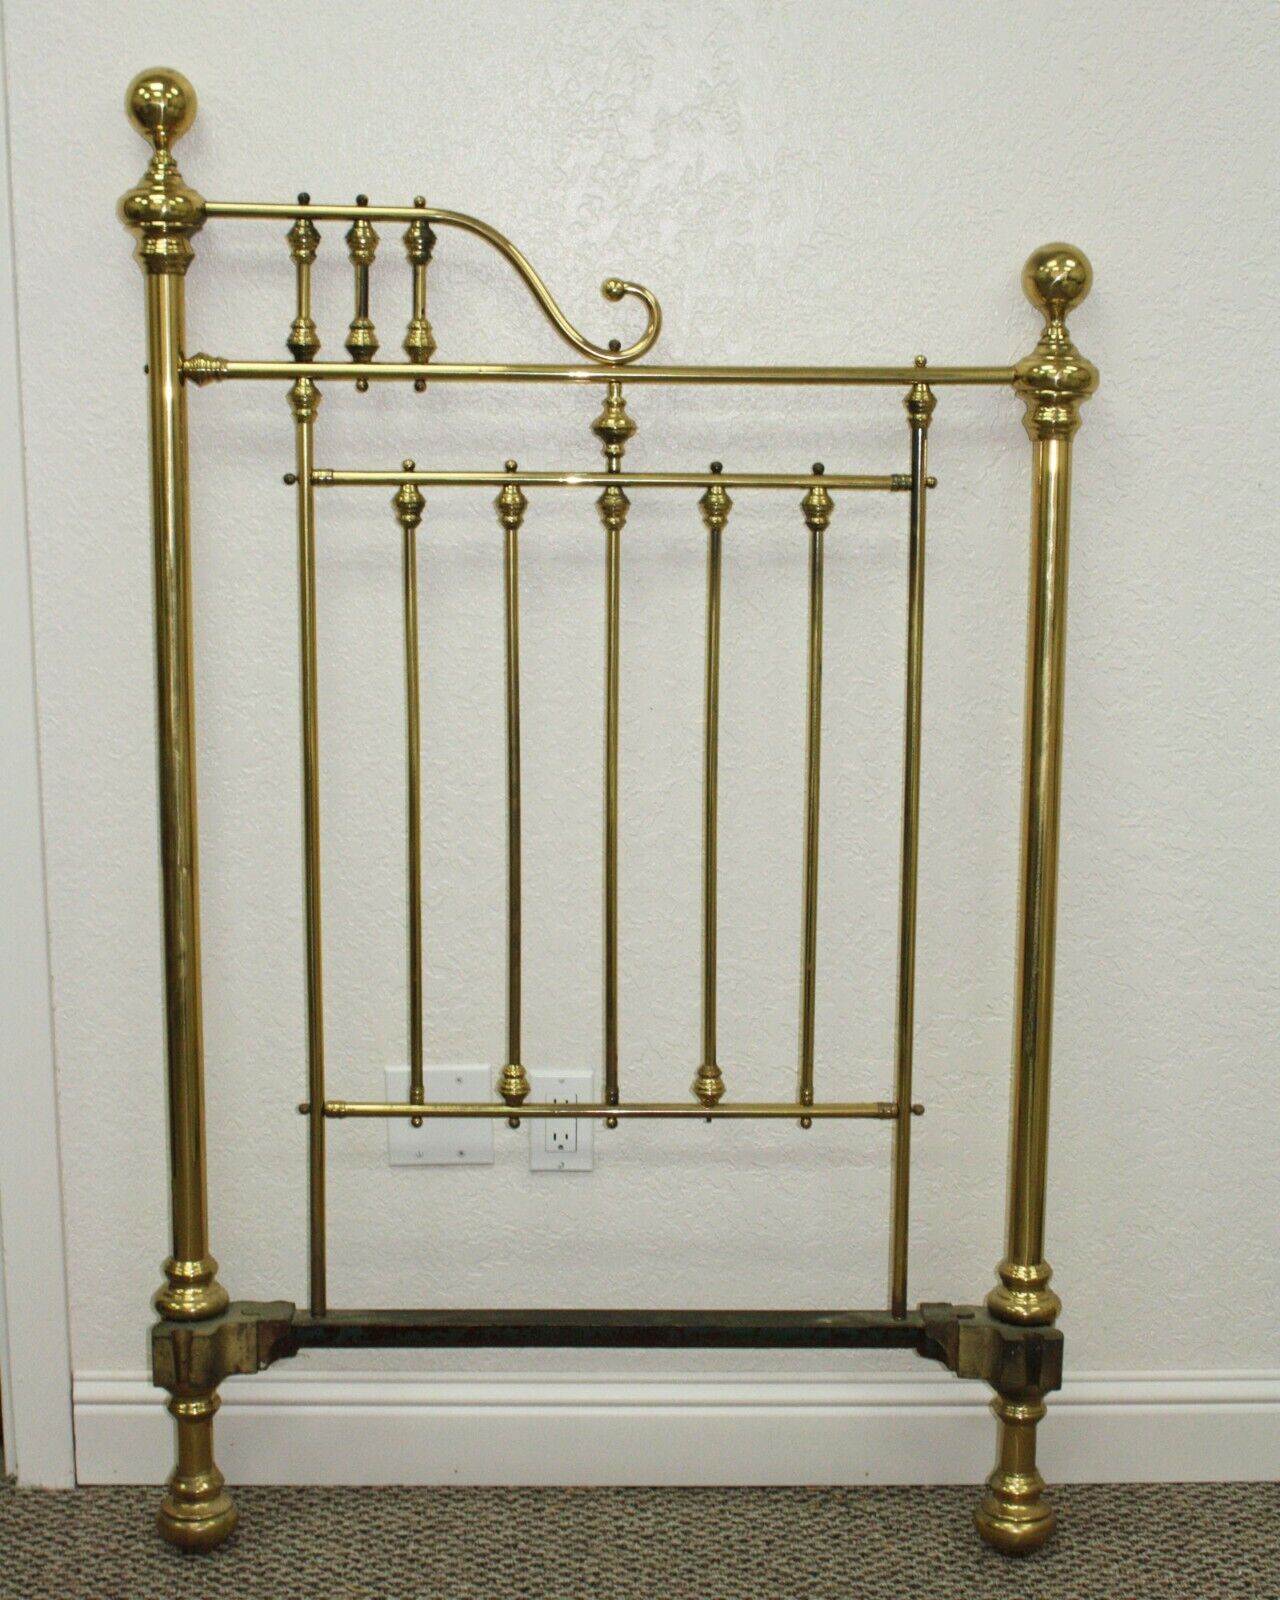 EXTREMELY RARE ANTIQUE PR OF VICTORIAN BRASS TWIN 3/4 BEDS THAT MAKE INTO A KING Без бренда - фотография #8